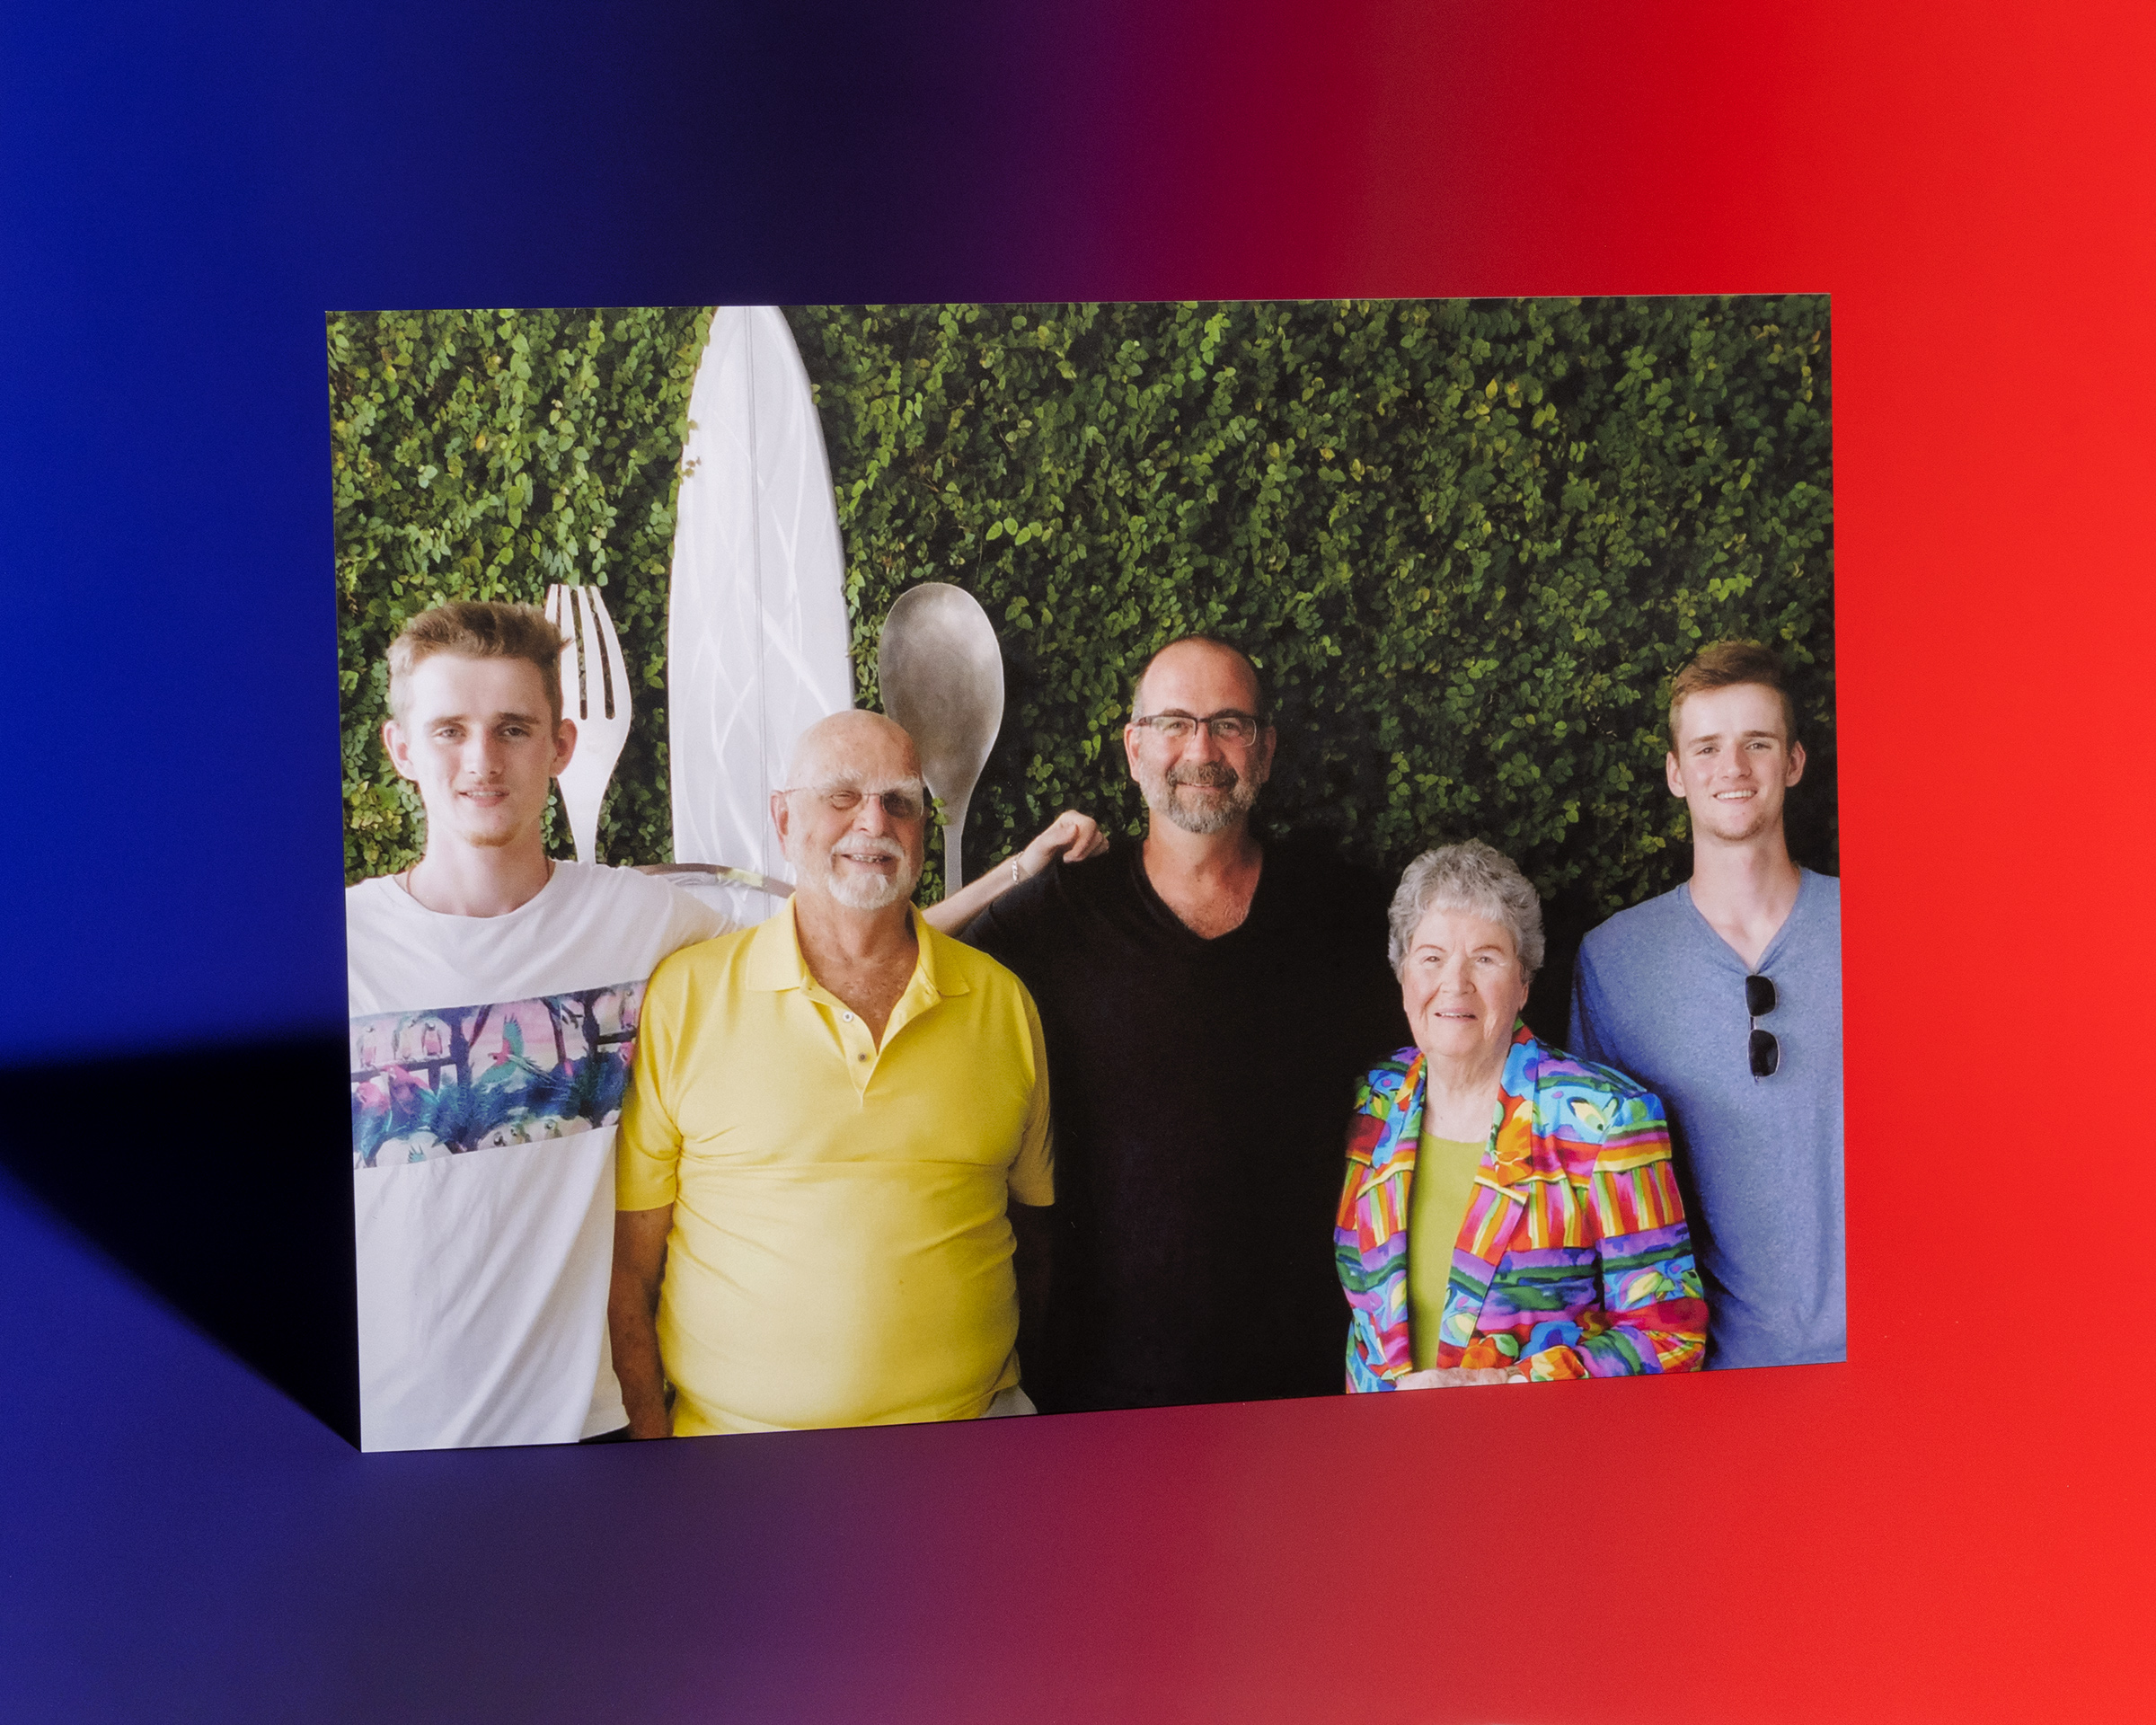 Paul Groen, center, flanked by his parents, Paul and Maxine, and his twin sons in Florida in 2019 (Photo-Illustration by Ben Alper for TIME; Photo courtesy Paul Goodwin-Groen)